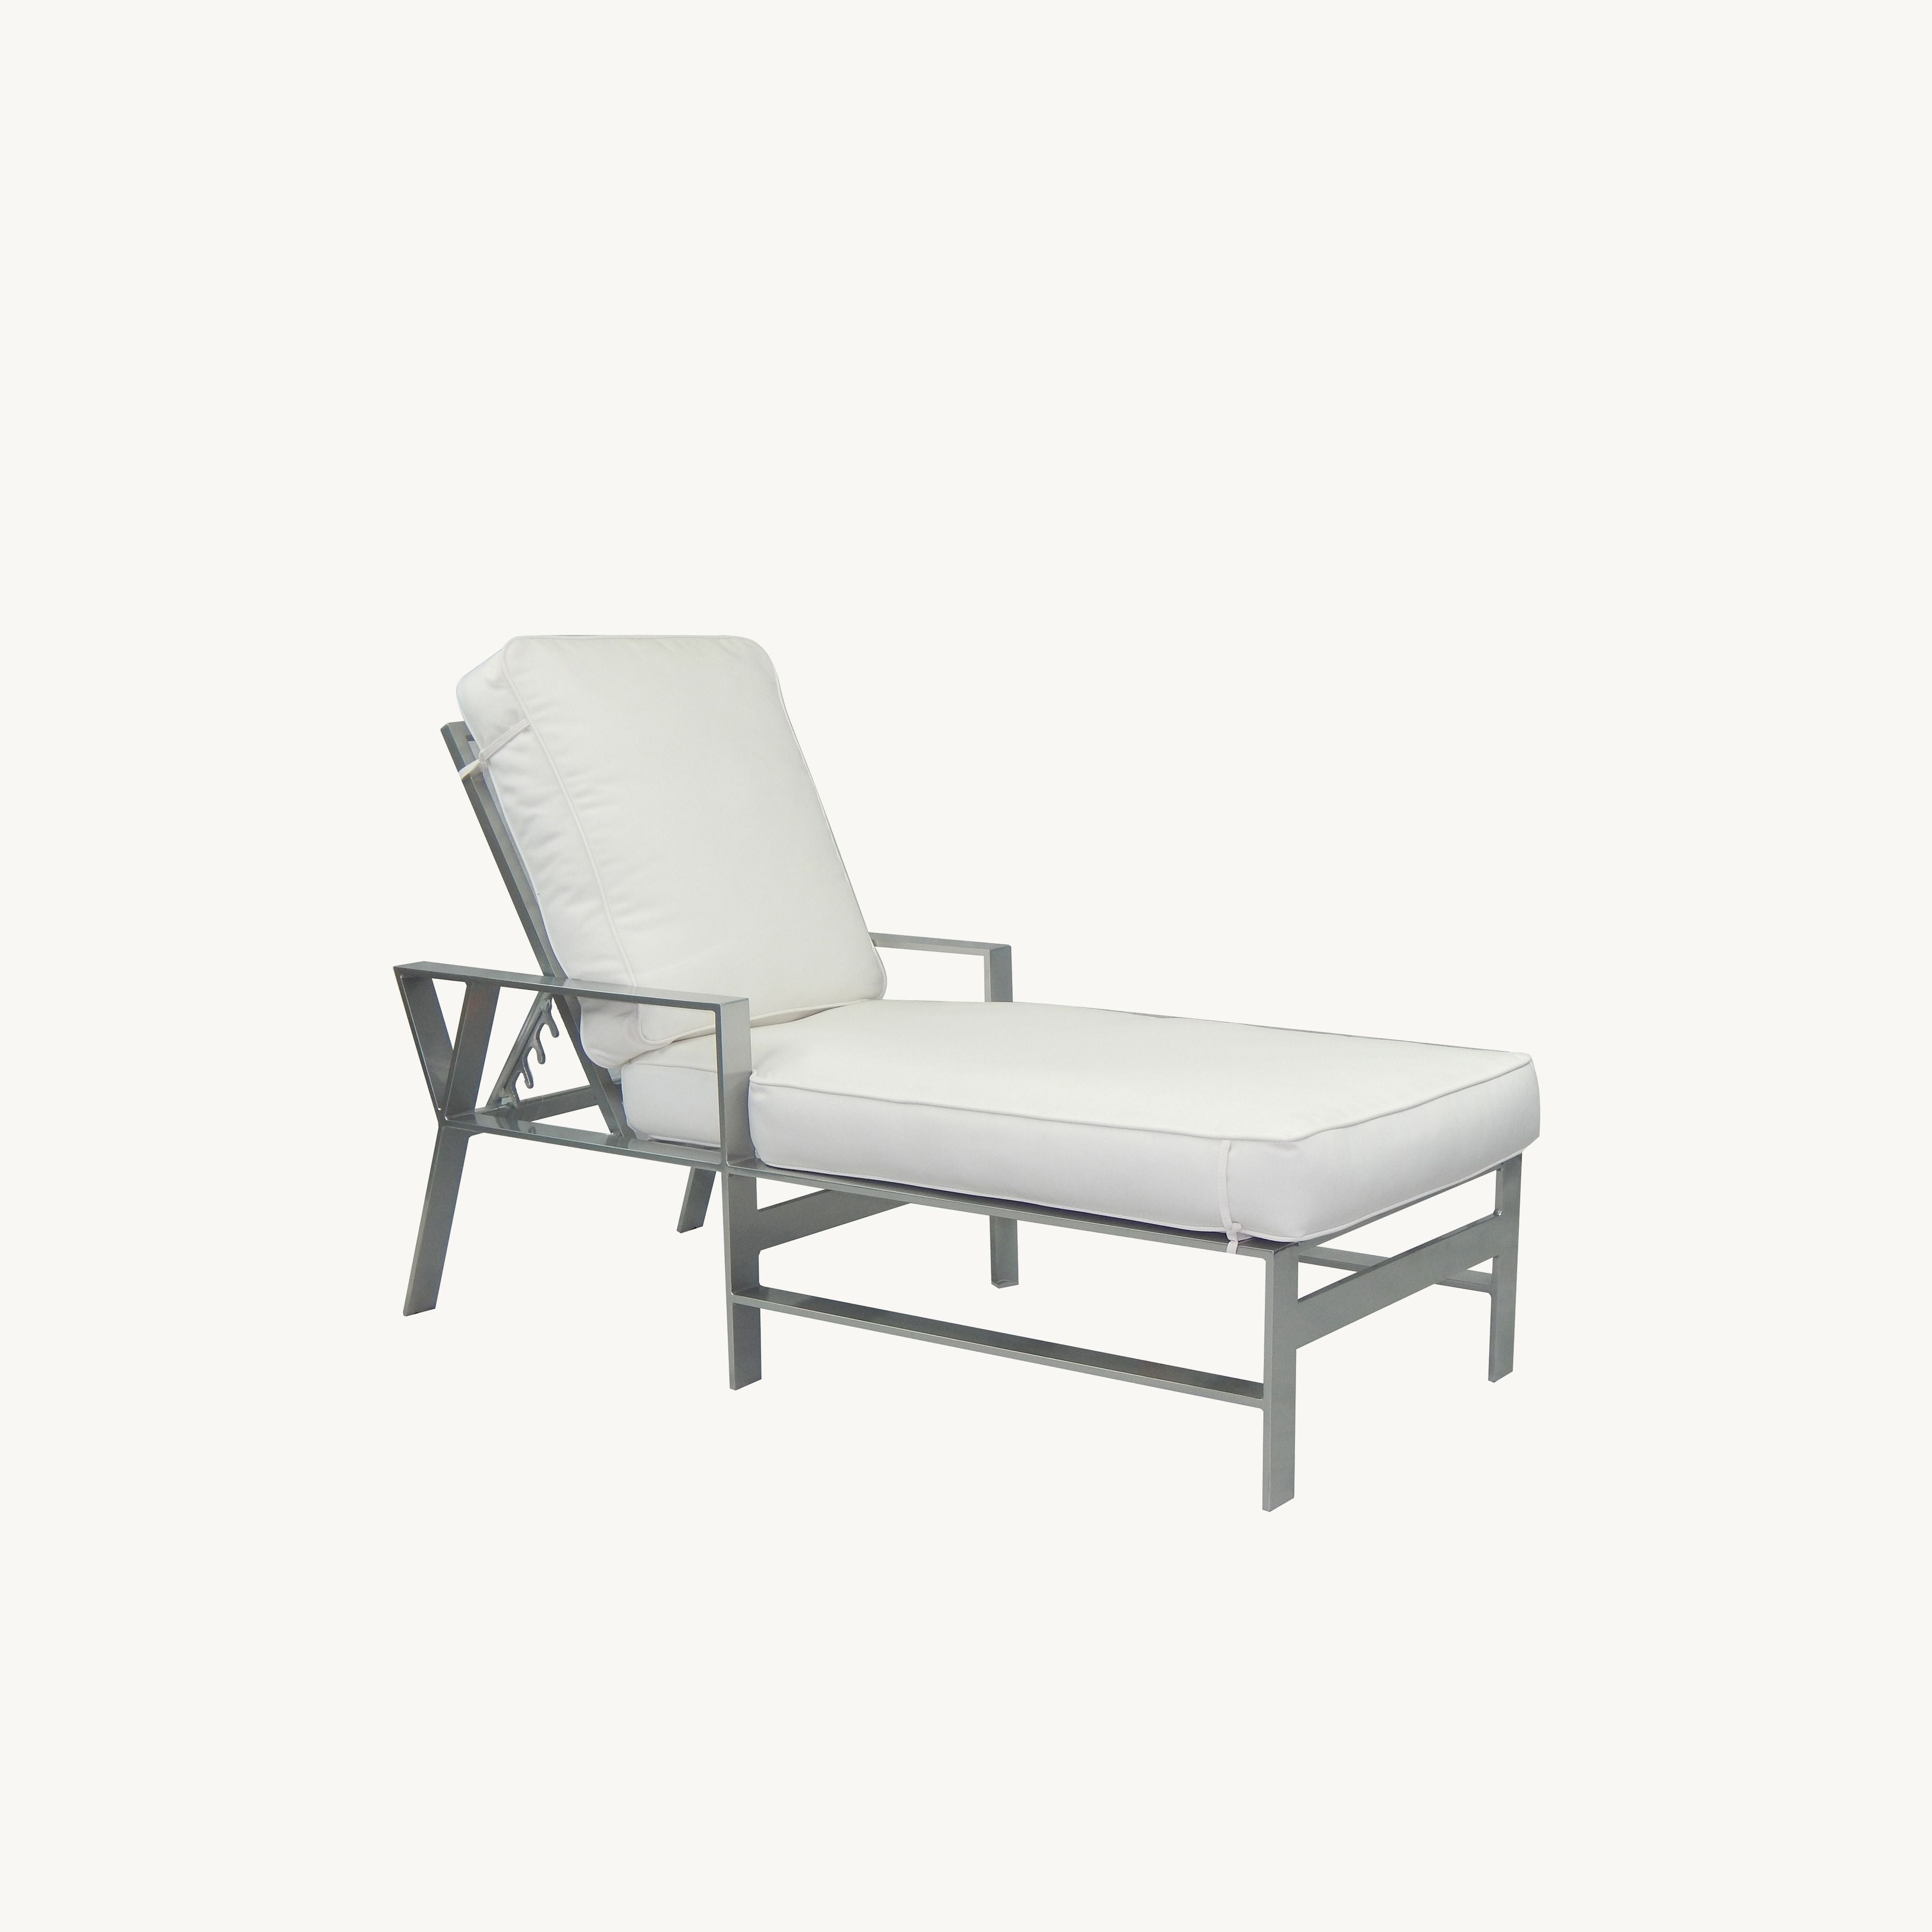 Trento Adjustable Cushioned Chaise Lounge By Castelle